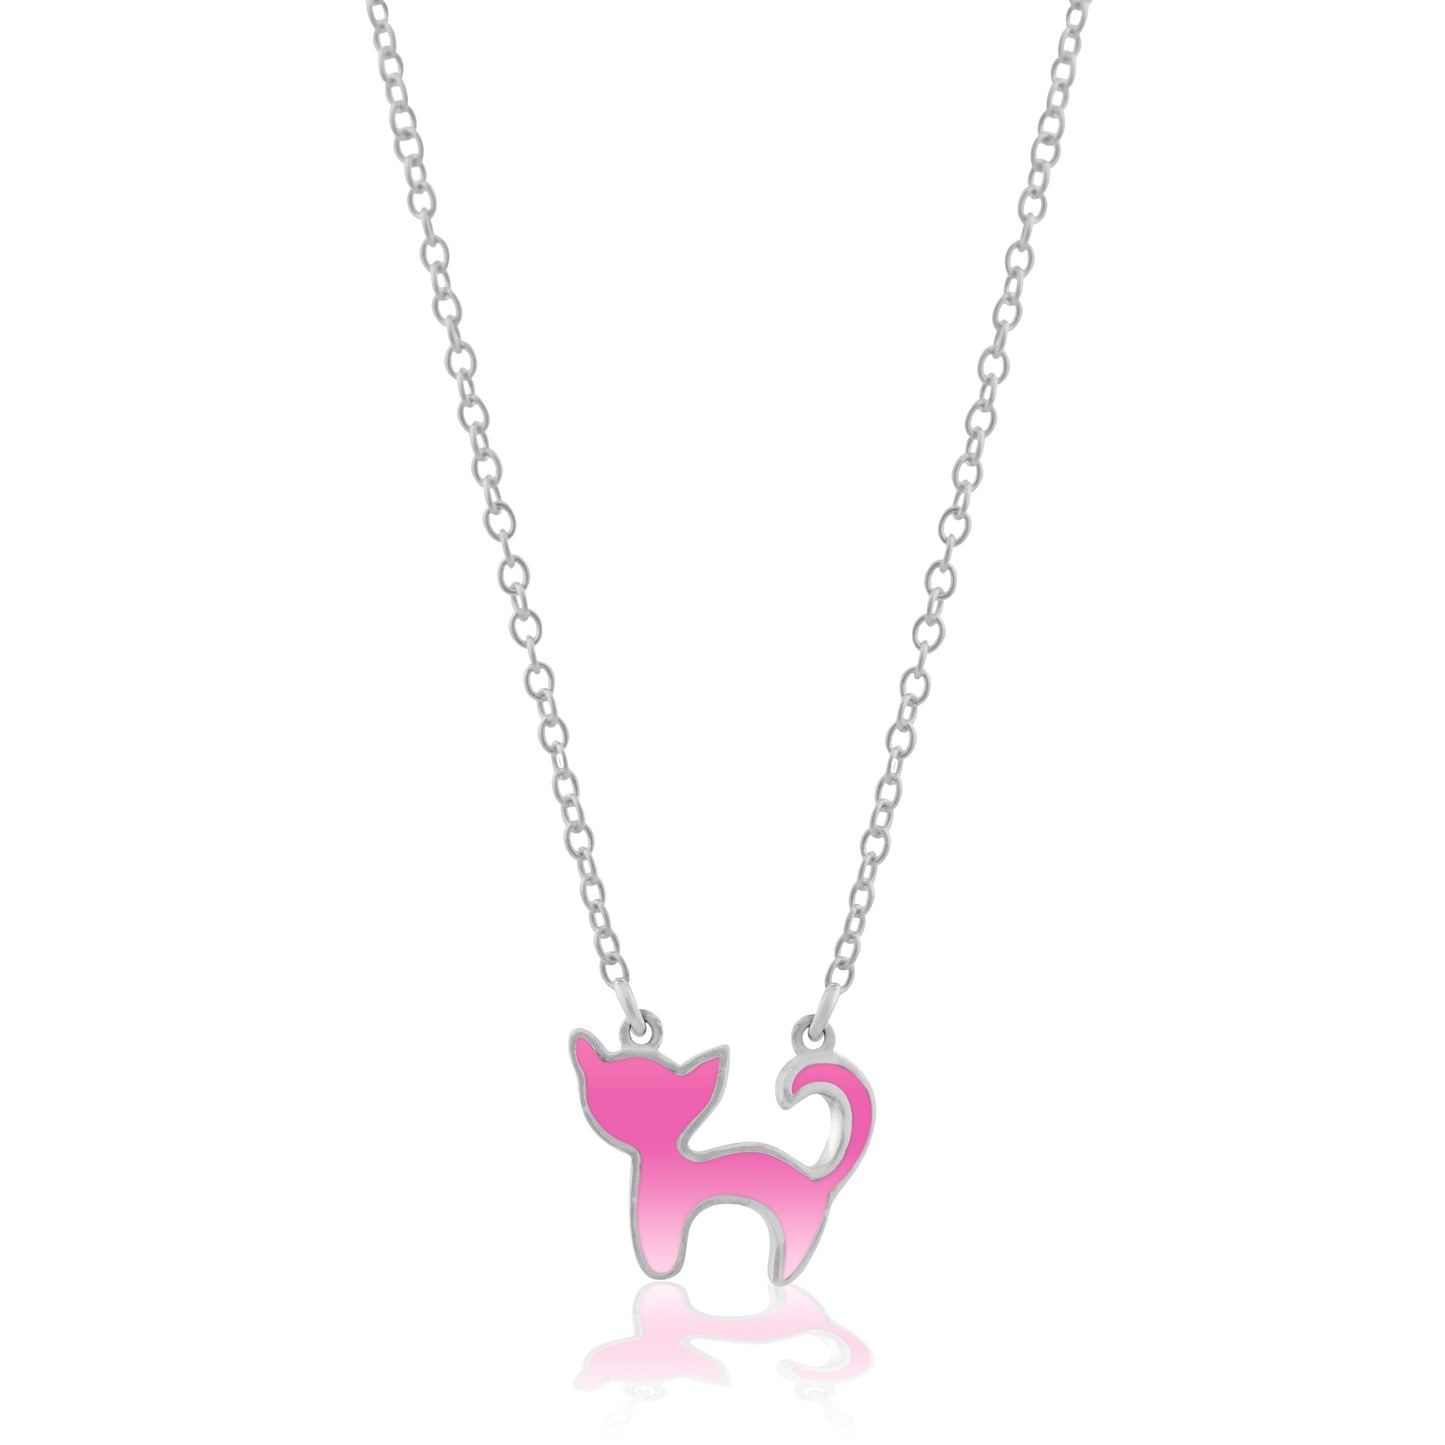 The Enamel Kitty Bliss: Whimsical Pendant and Chain Set